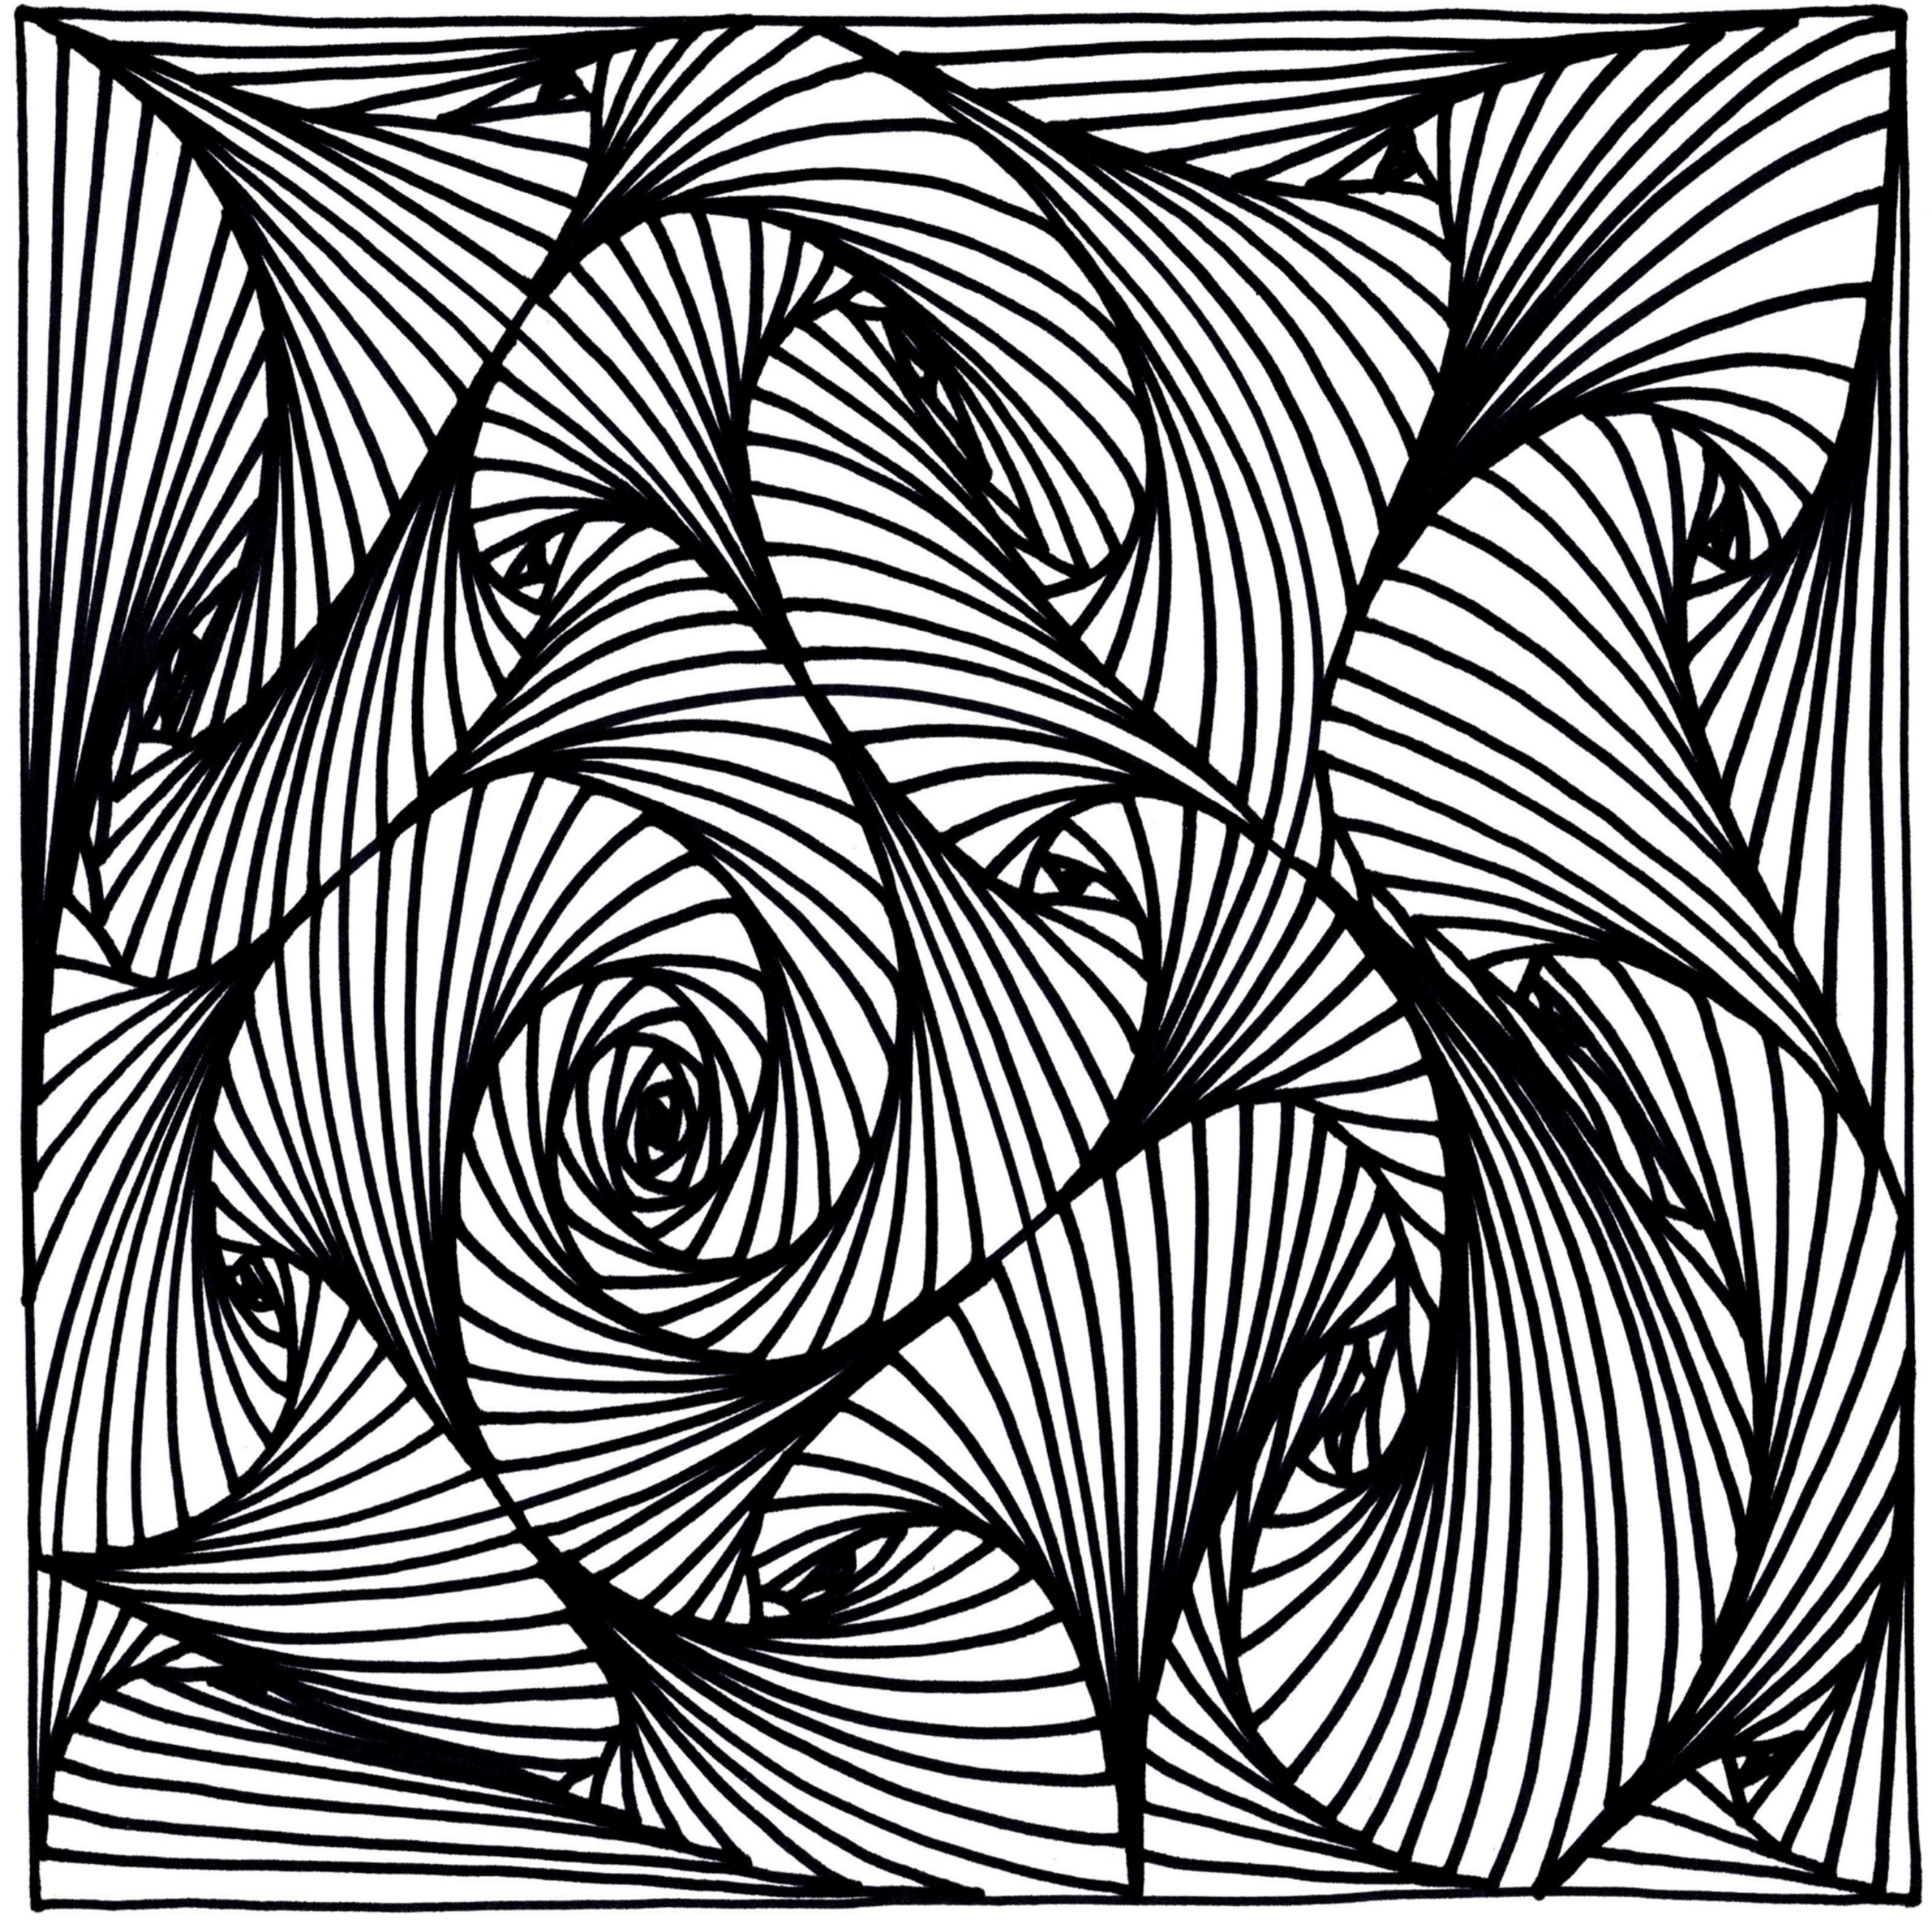 The Art of Spiral Drawing - Walter Foster